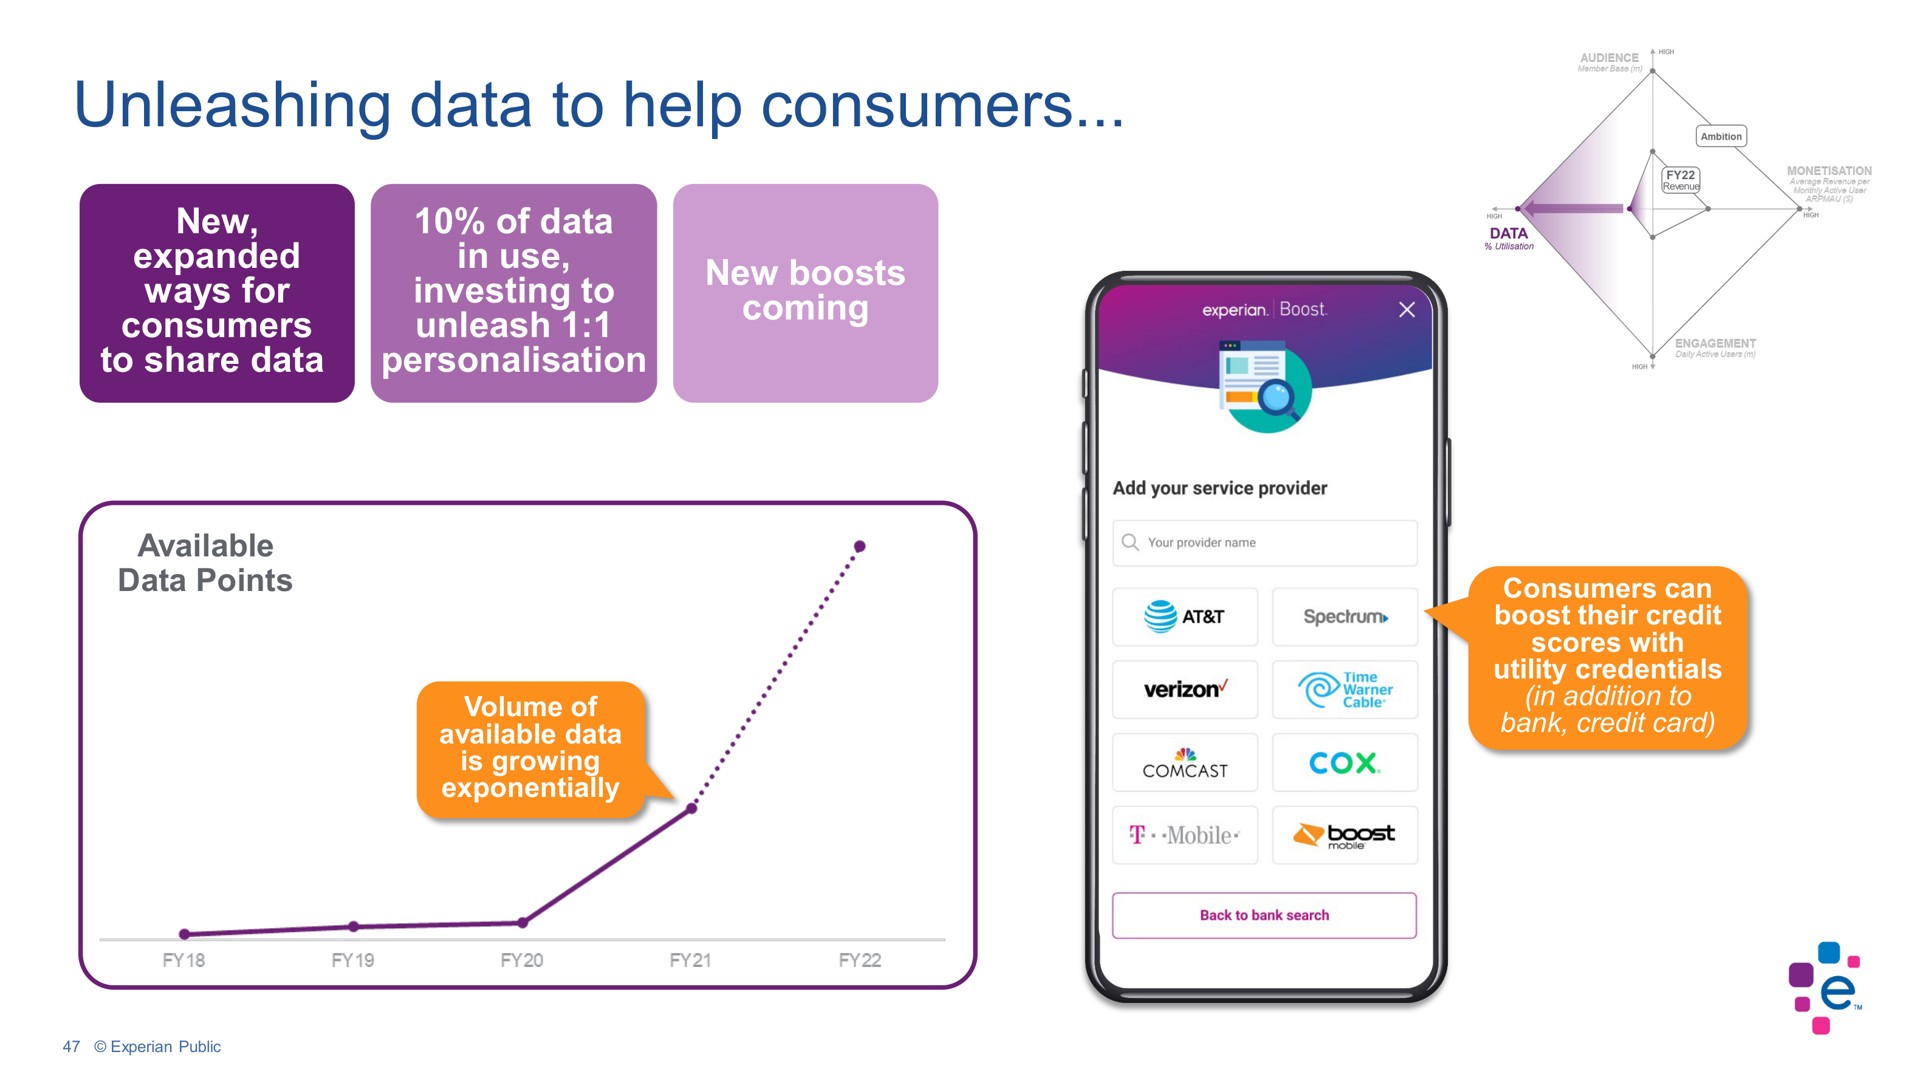 unleashing data to help consumers | Experian